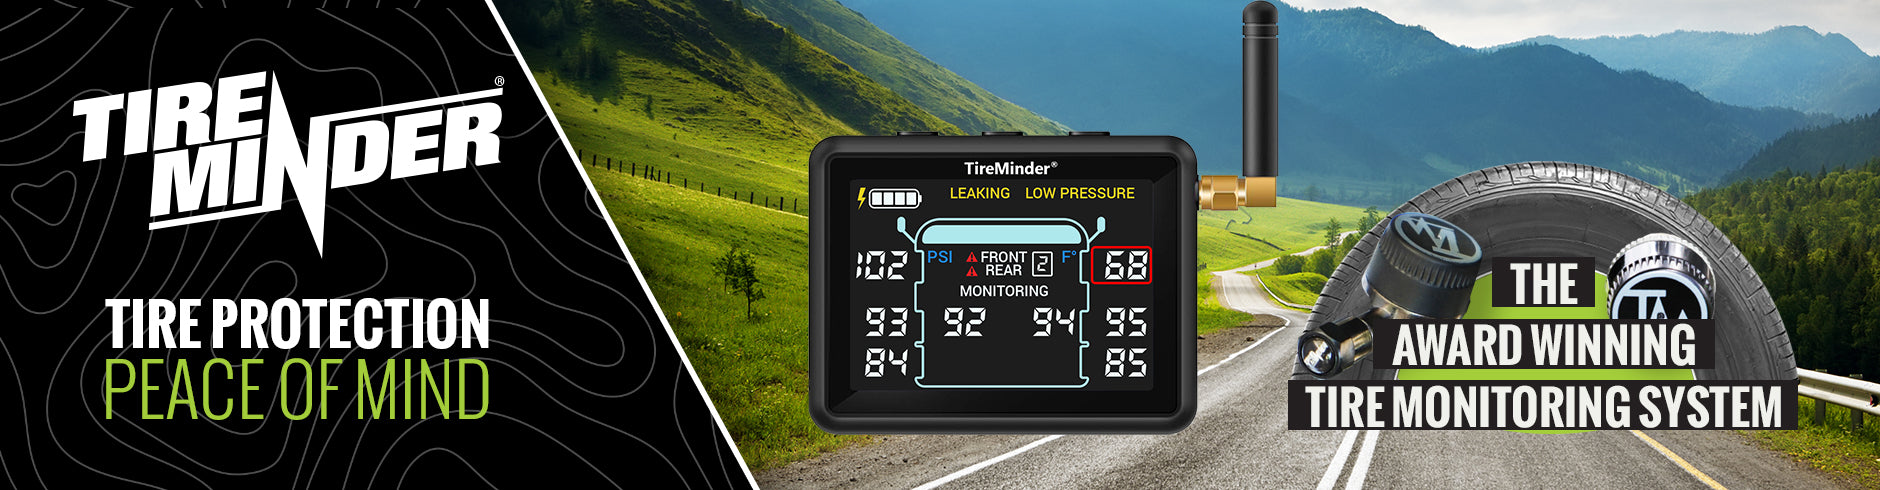 Tire Minder Tire Pressure Monitor Systems